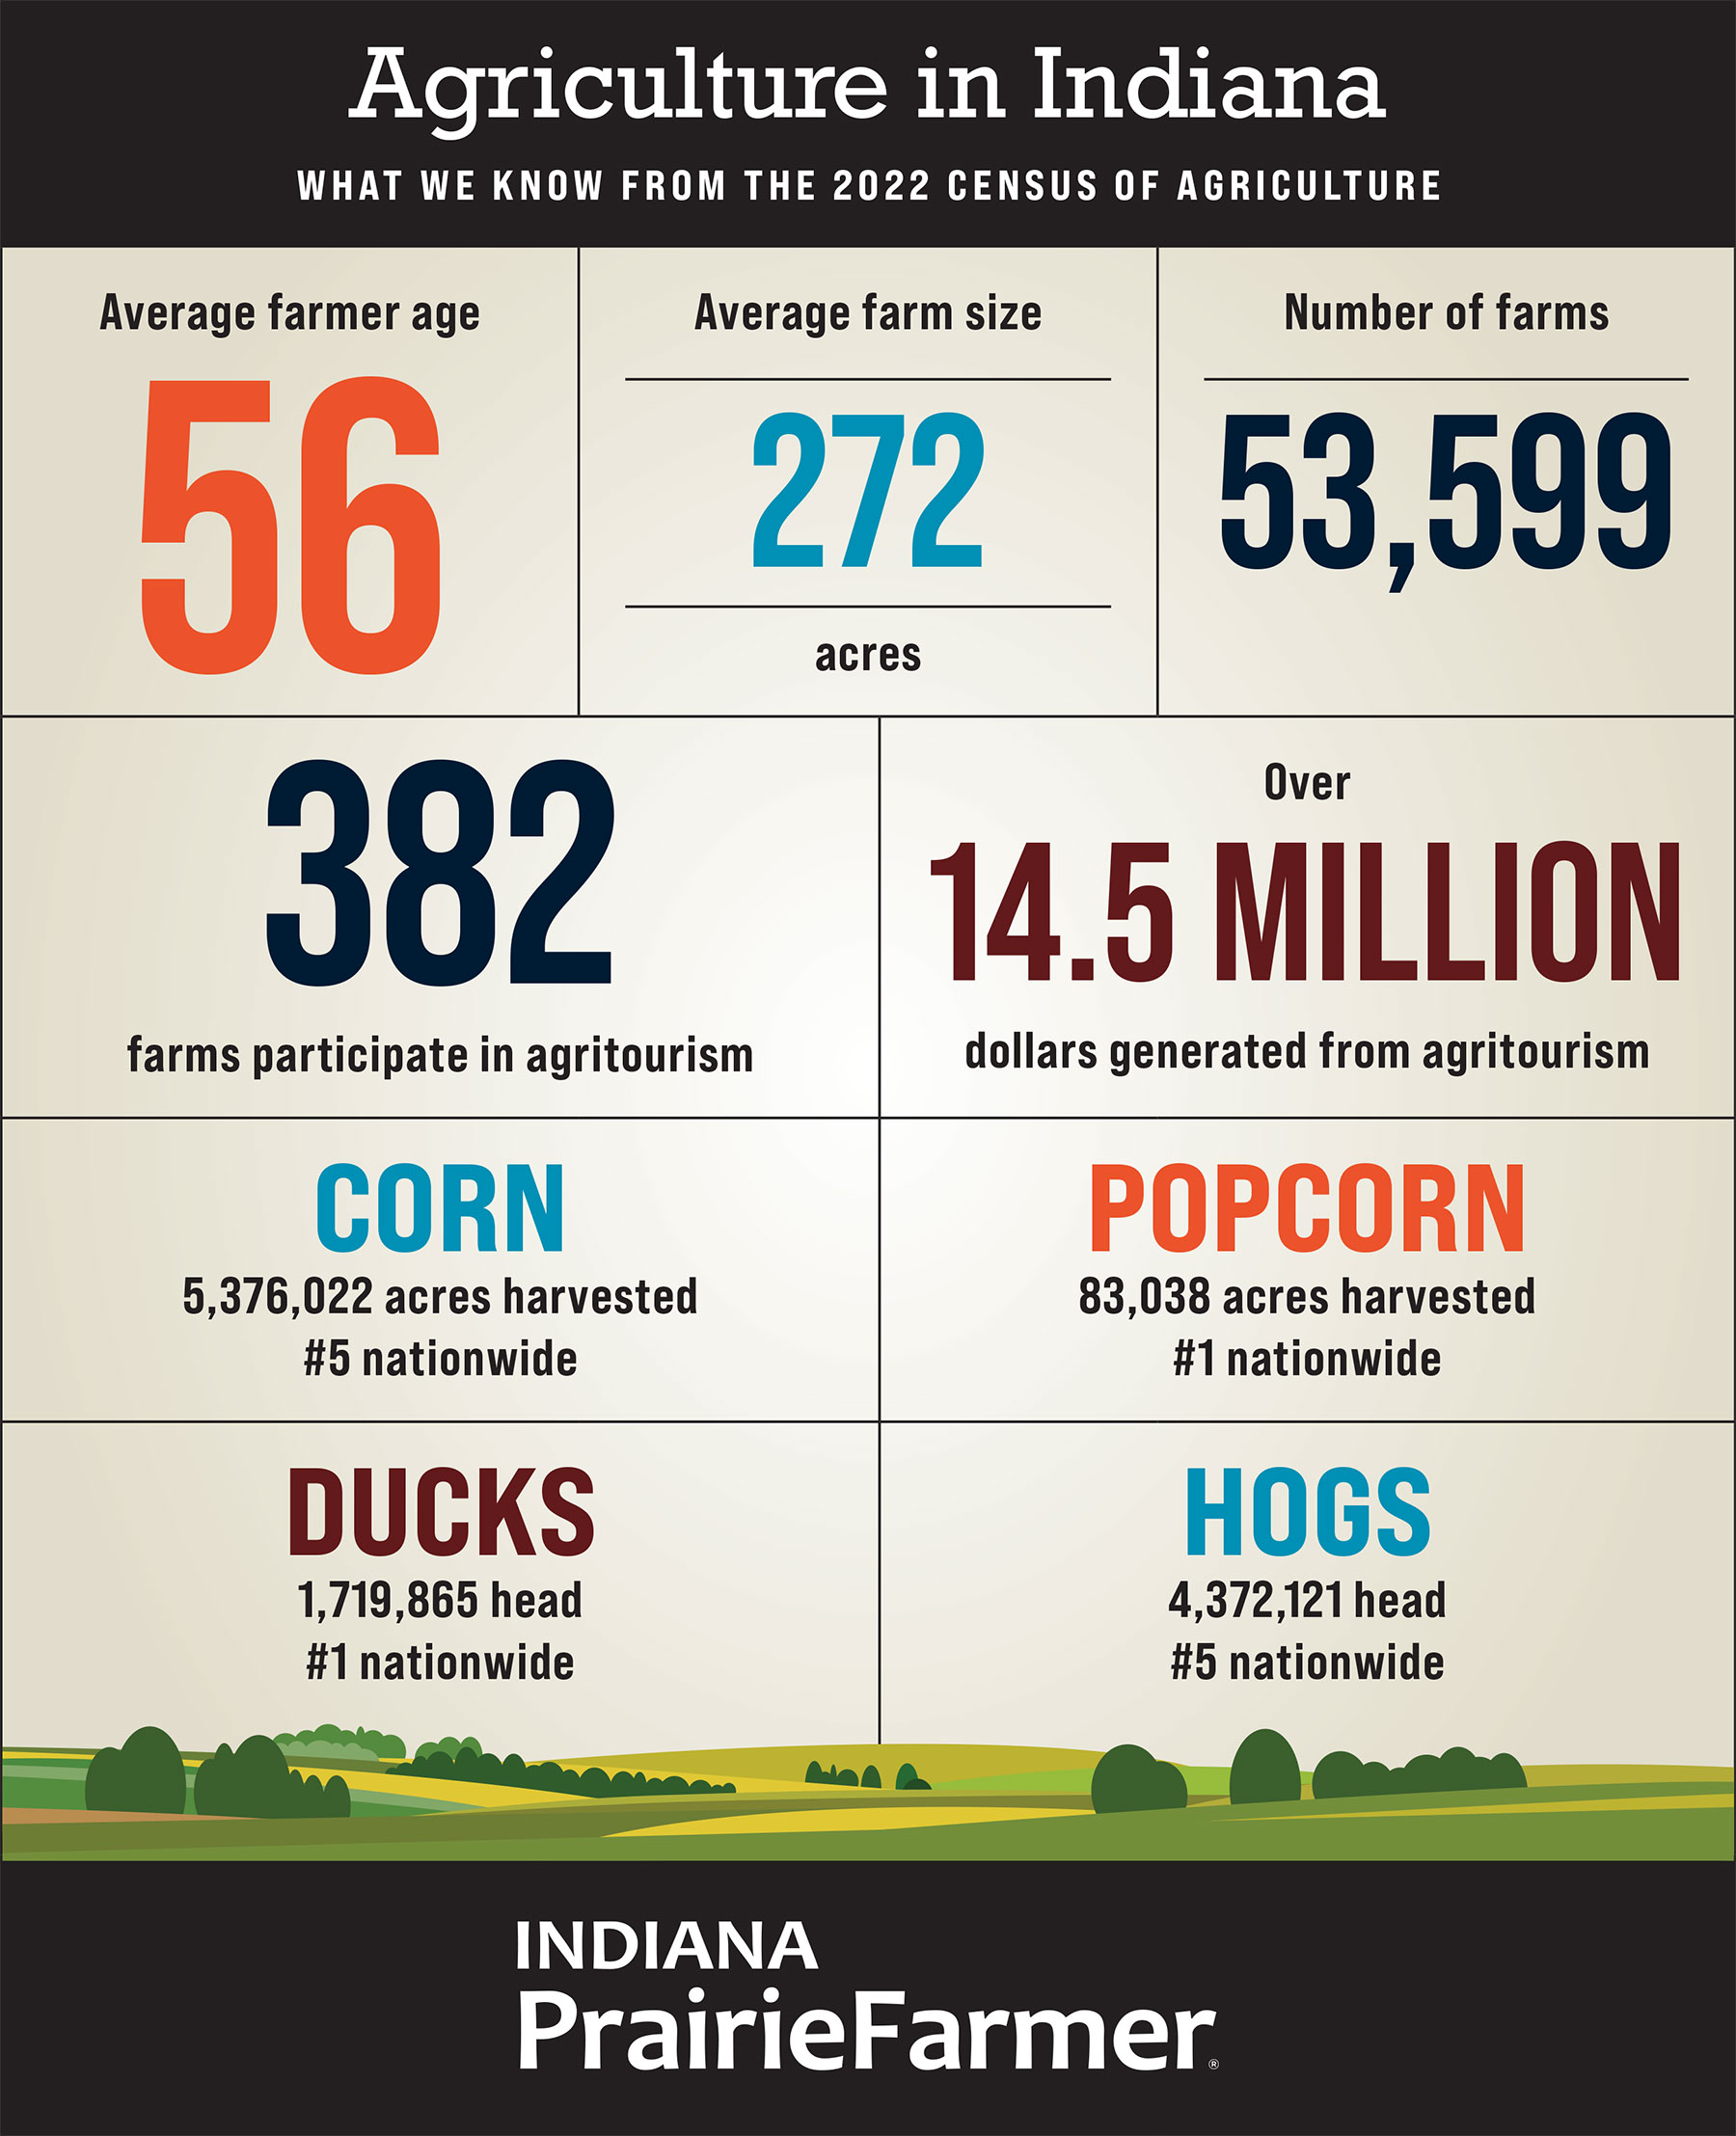 An infographic outlining data from the 2022 census of agriculture for the state of Indiana